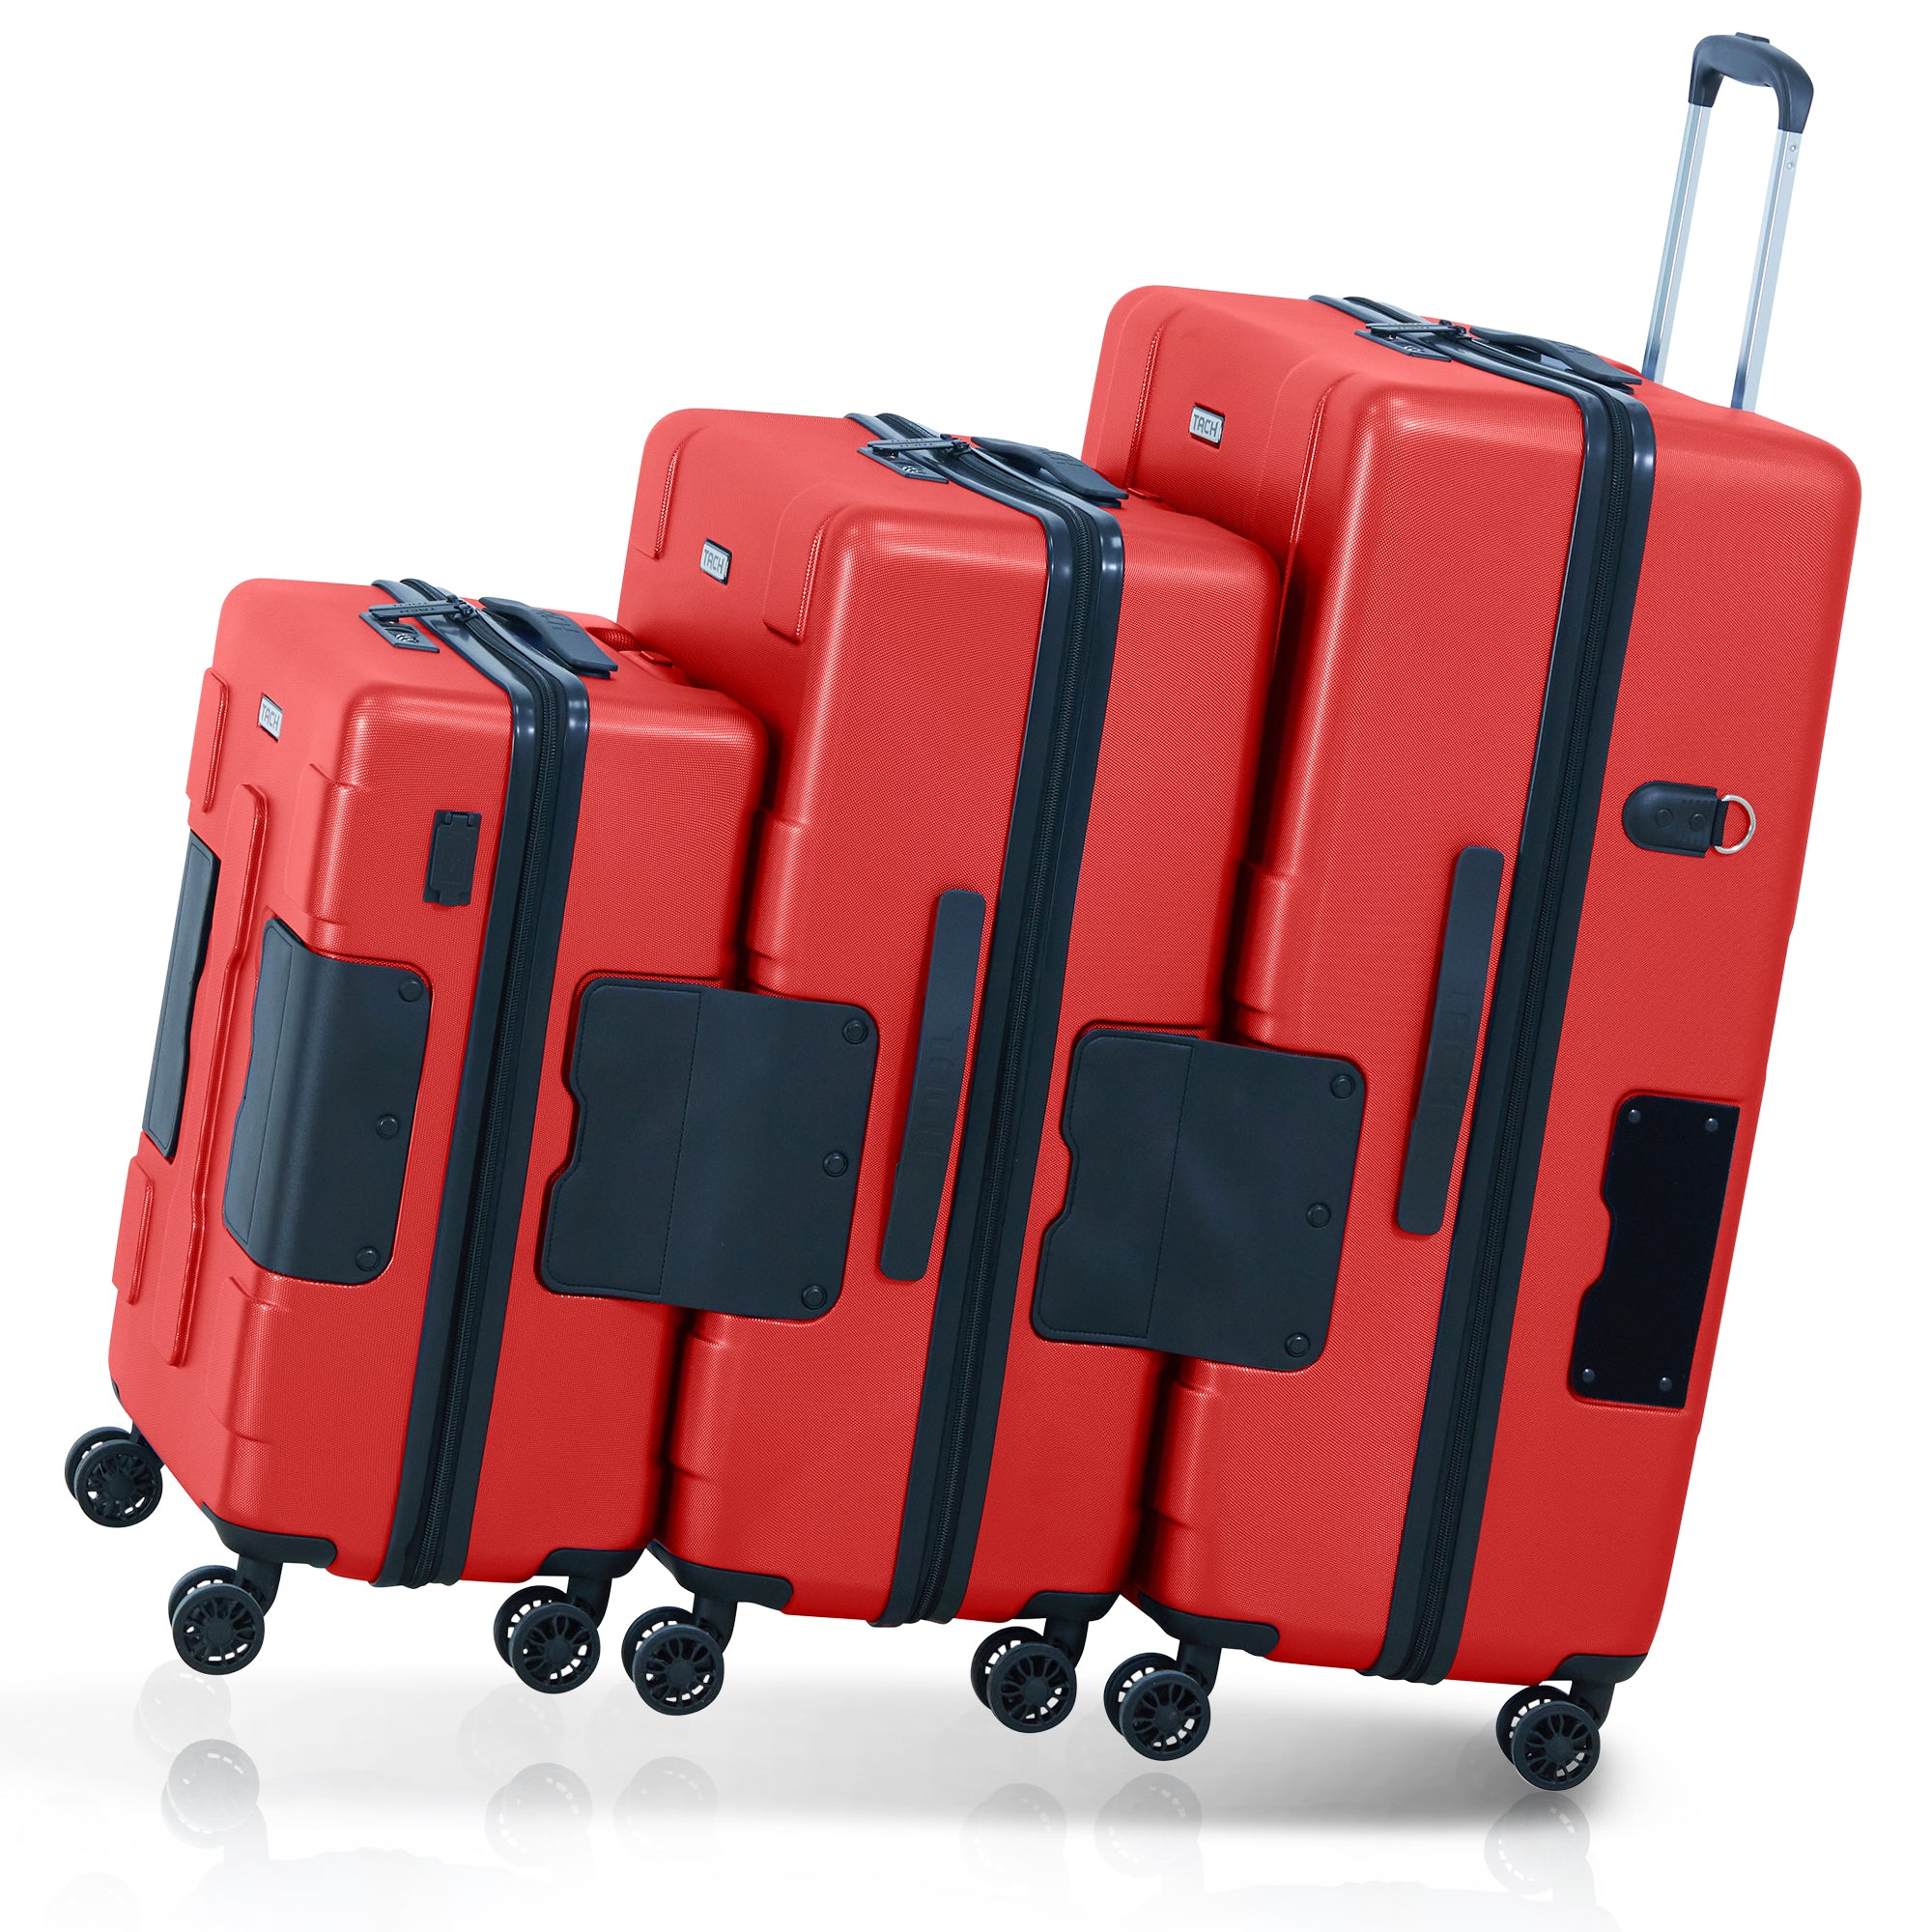 TACH V3 Connectable Luggage Bag Set of 3